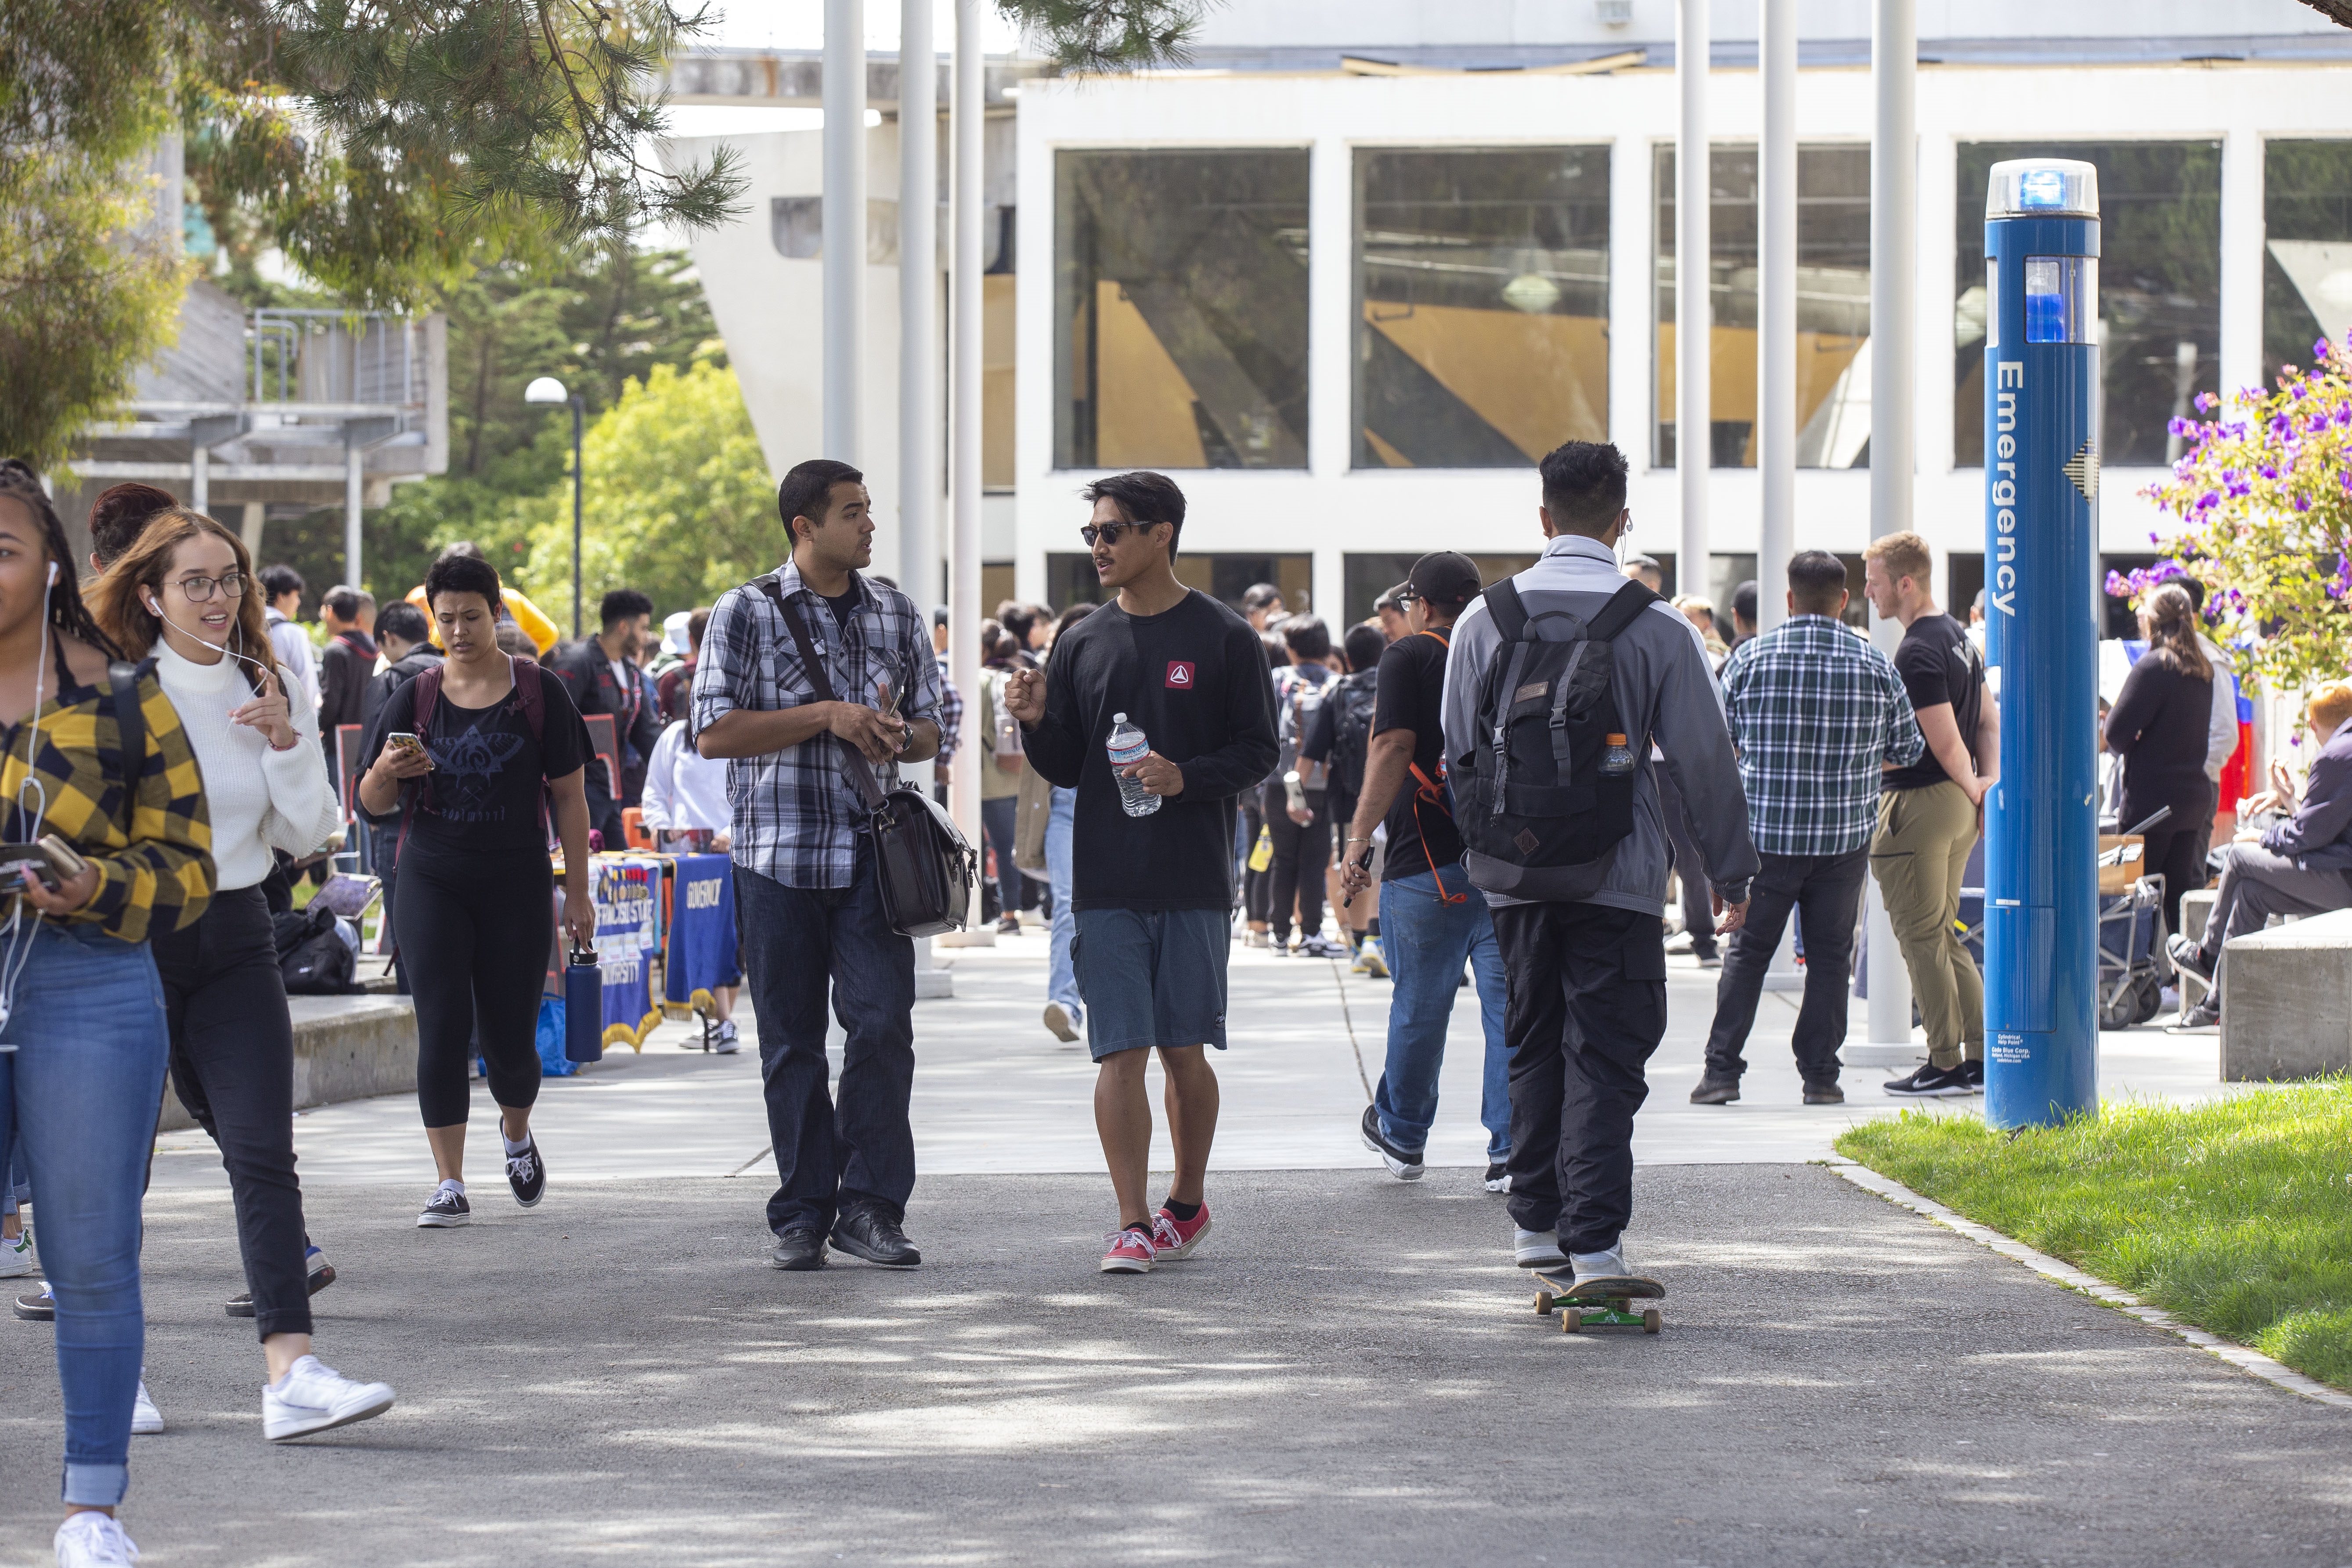 Students walking through the pathways on campus